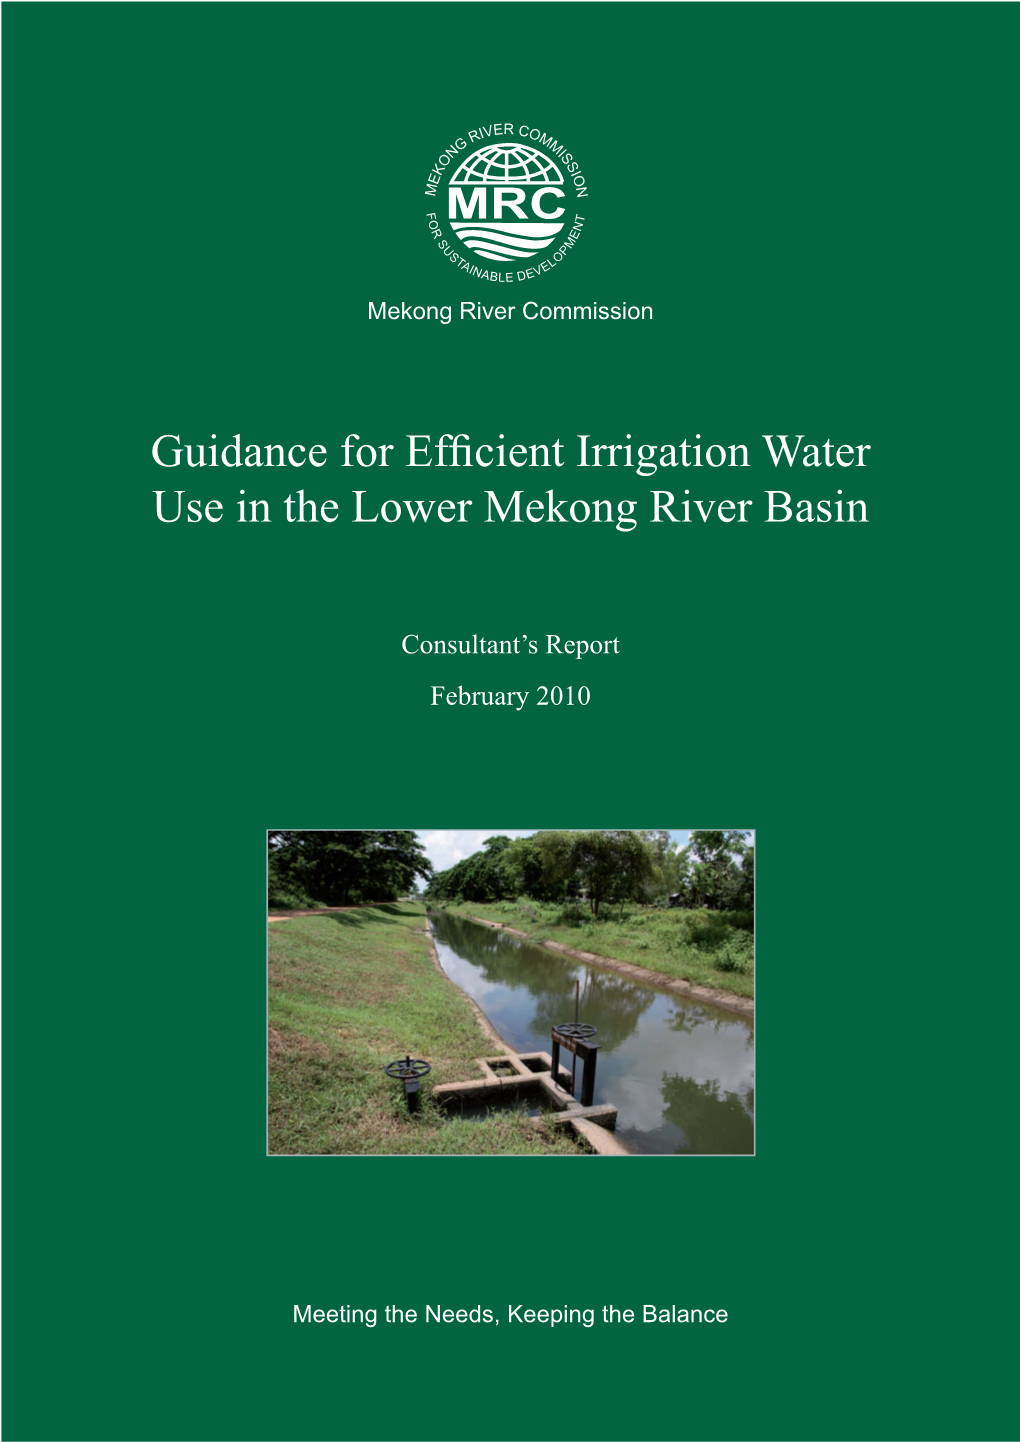 Guidance for Efficient Irrigation Water Use in the Lower Mekong River Basin